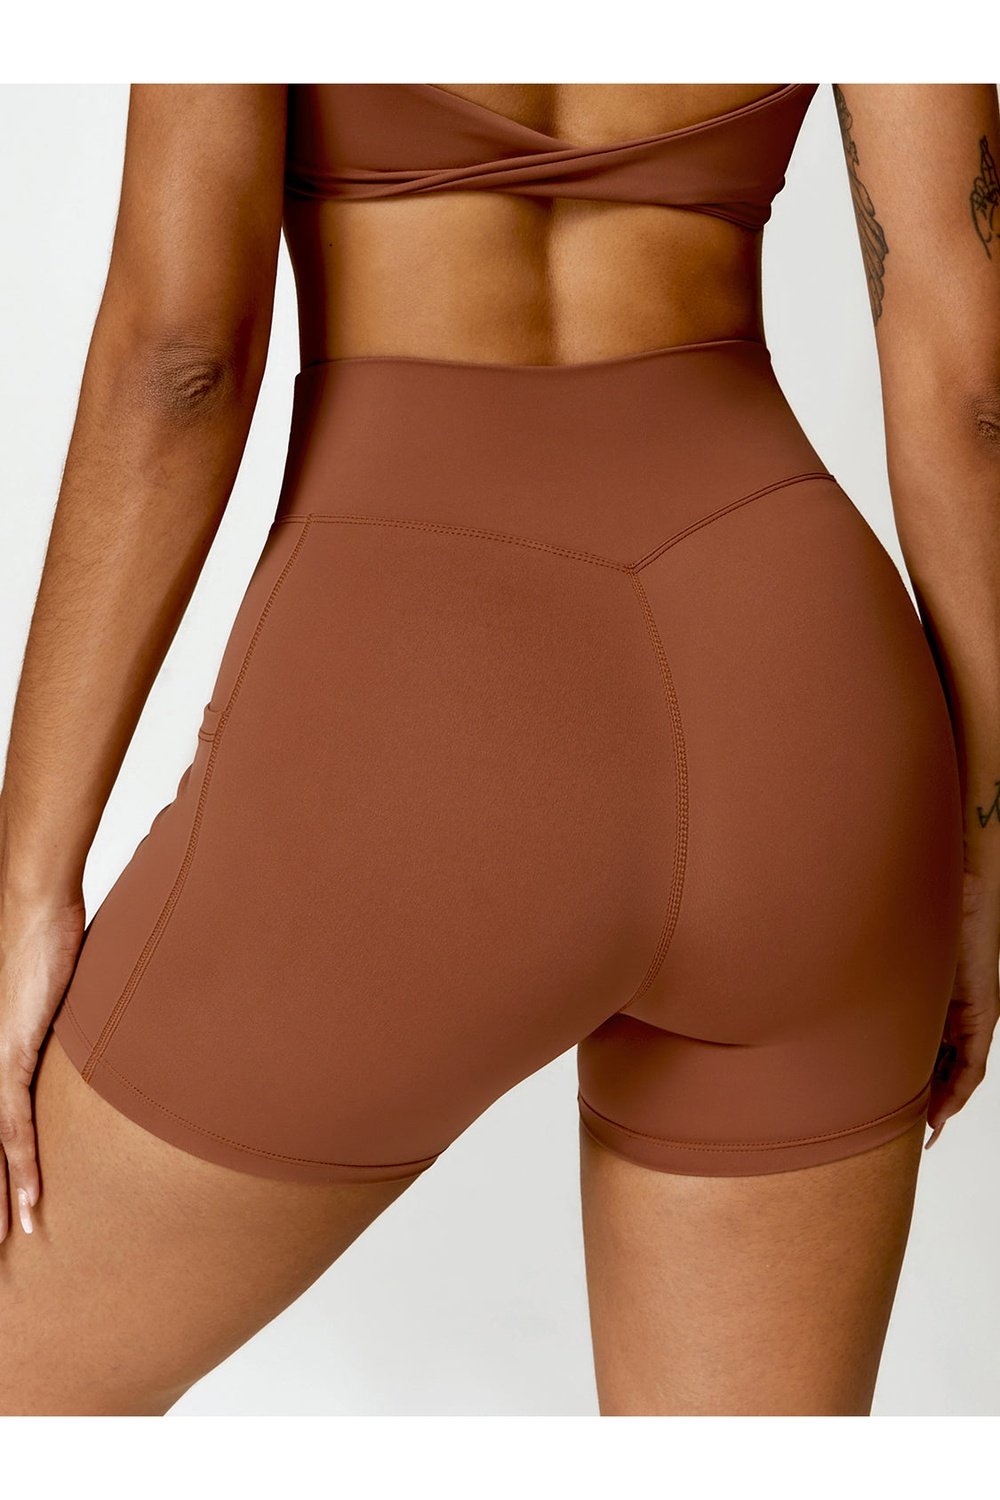 Twisted High Waist Active Shorts with Pockets - Short Leggings - FITGGINS